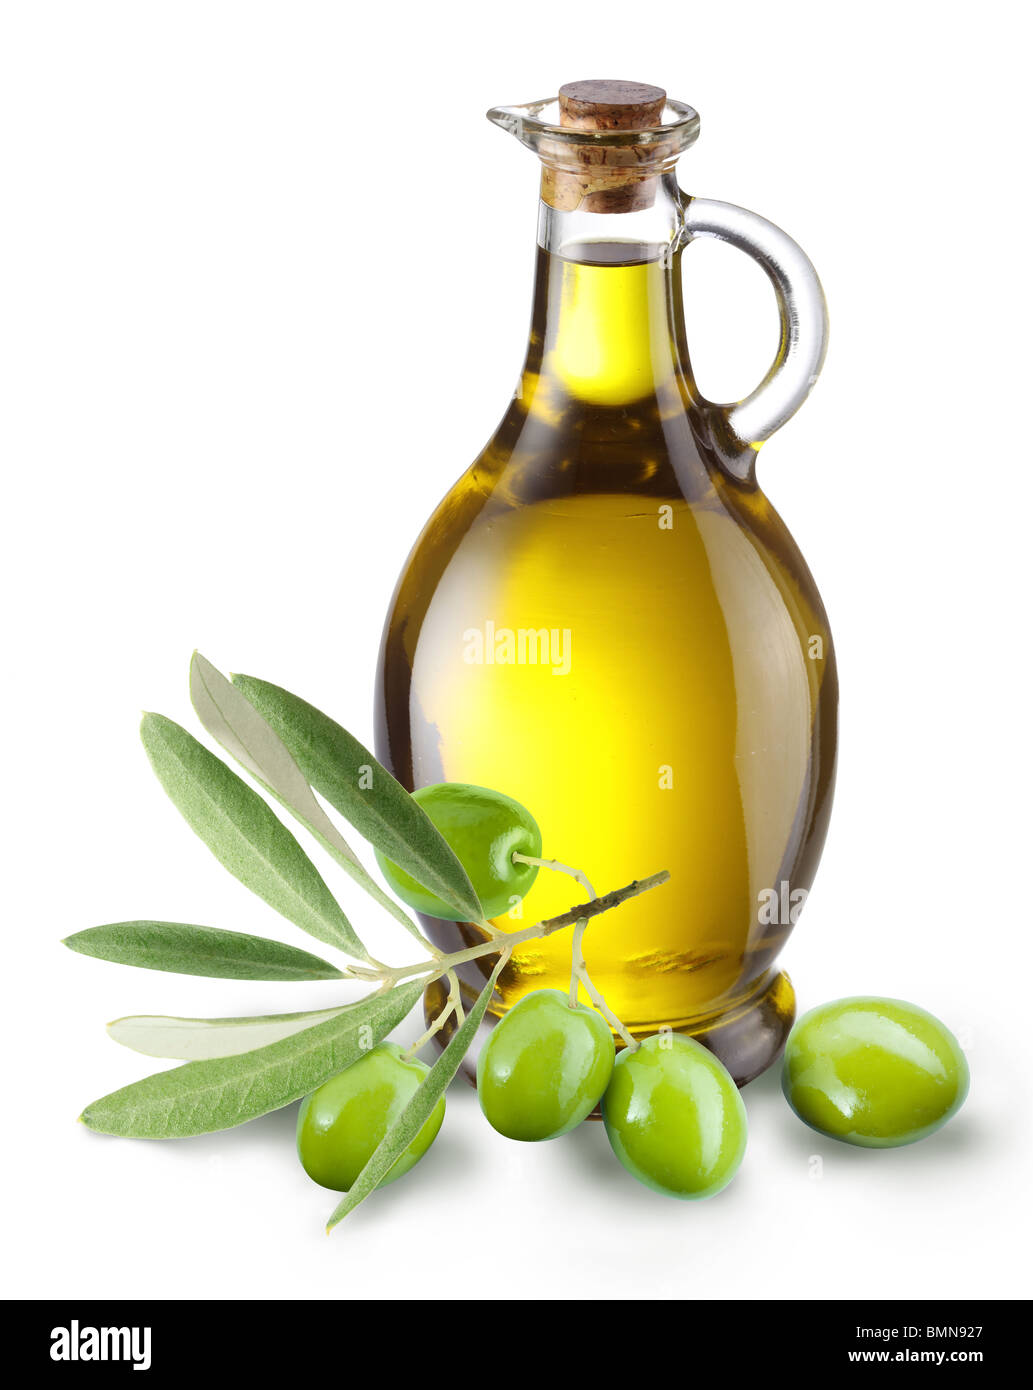 Branch with olives and a bottle of olive oil isolated on white Stock Photo